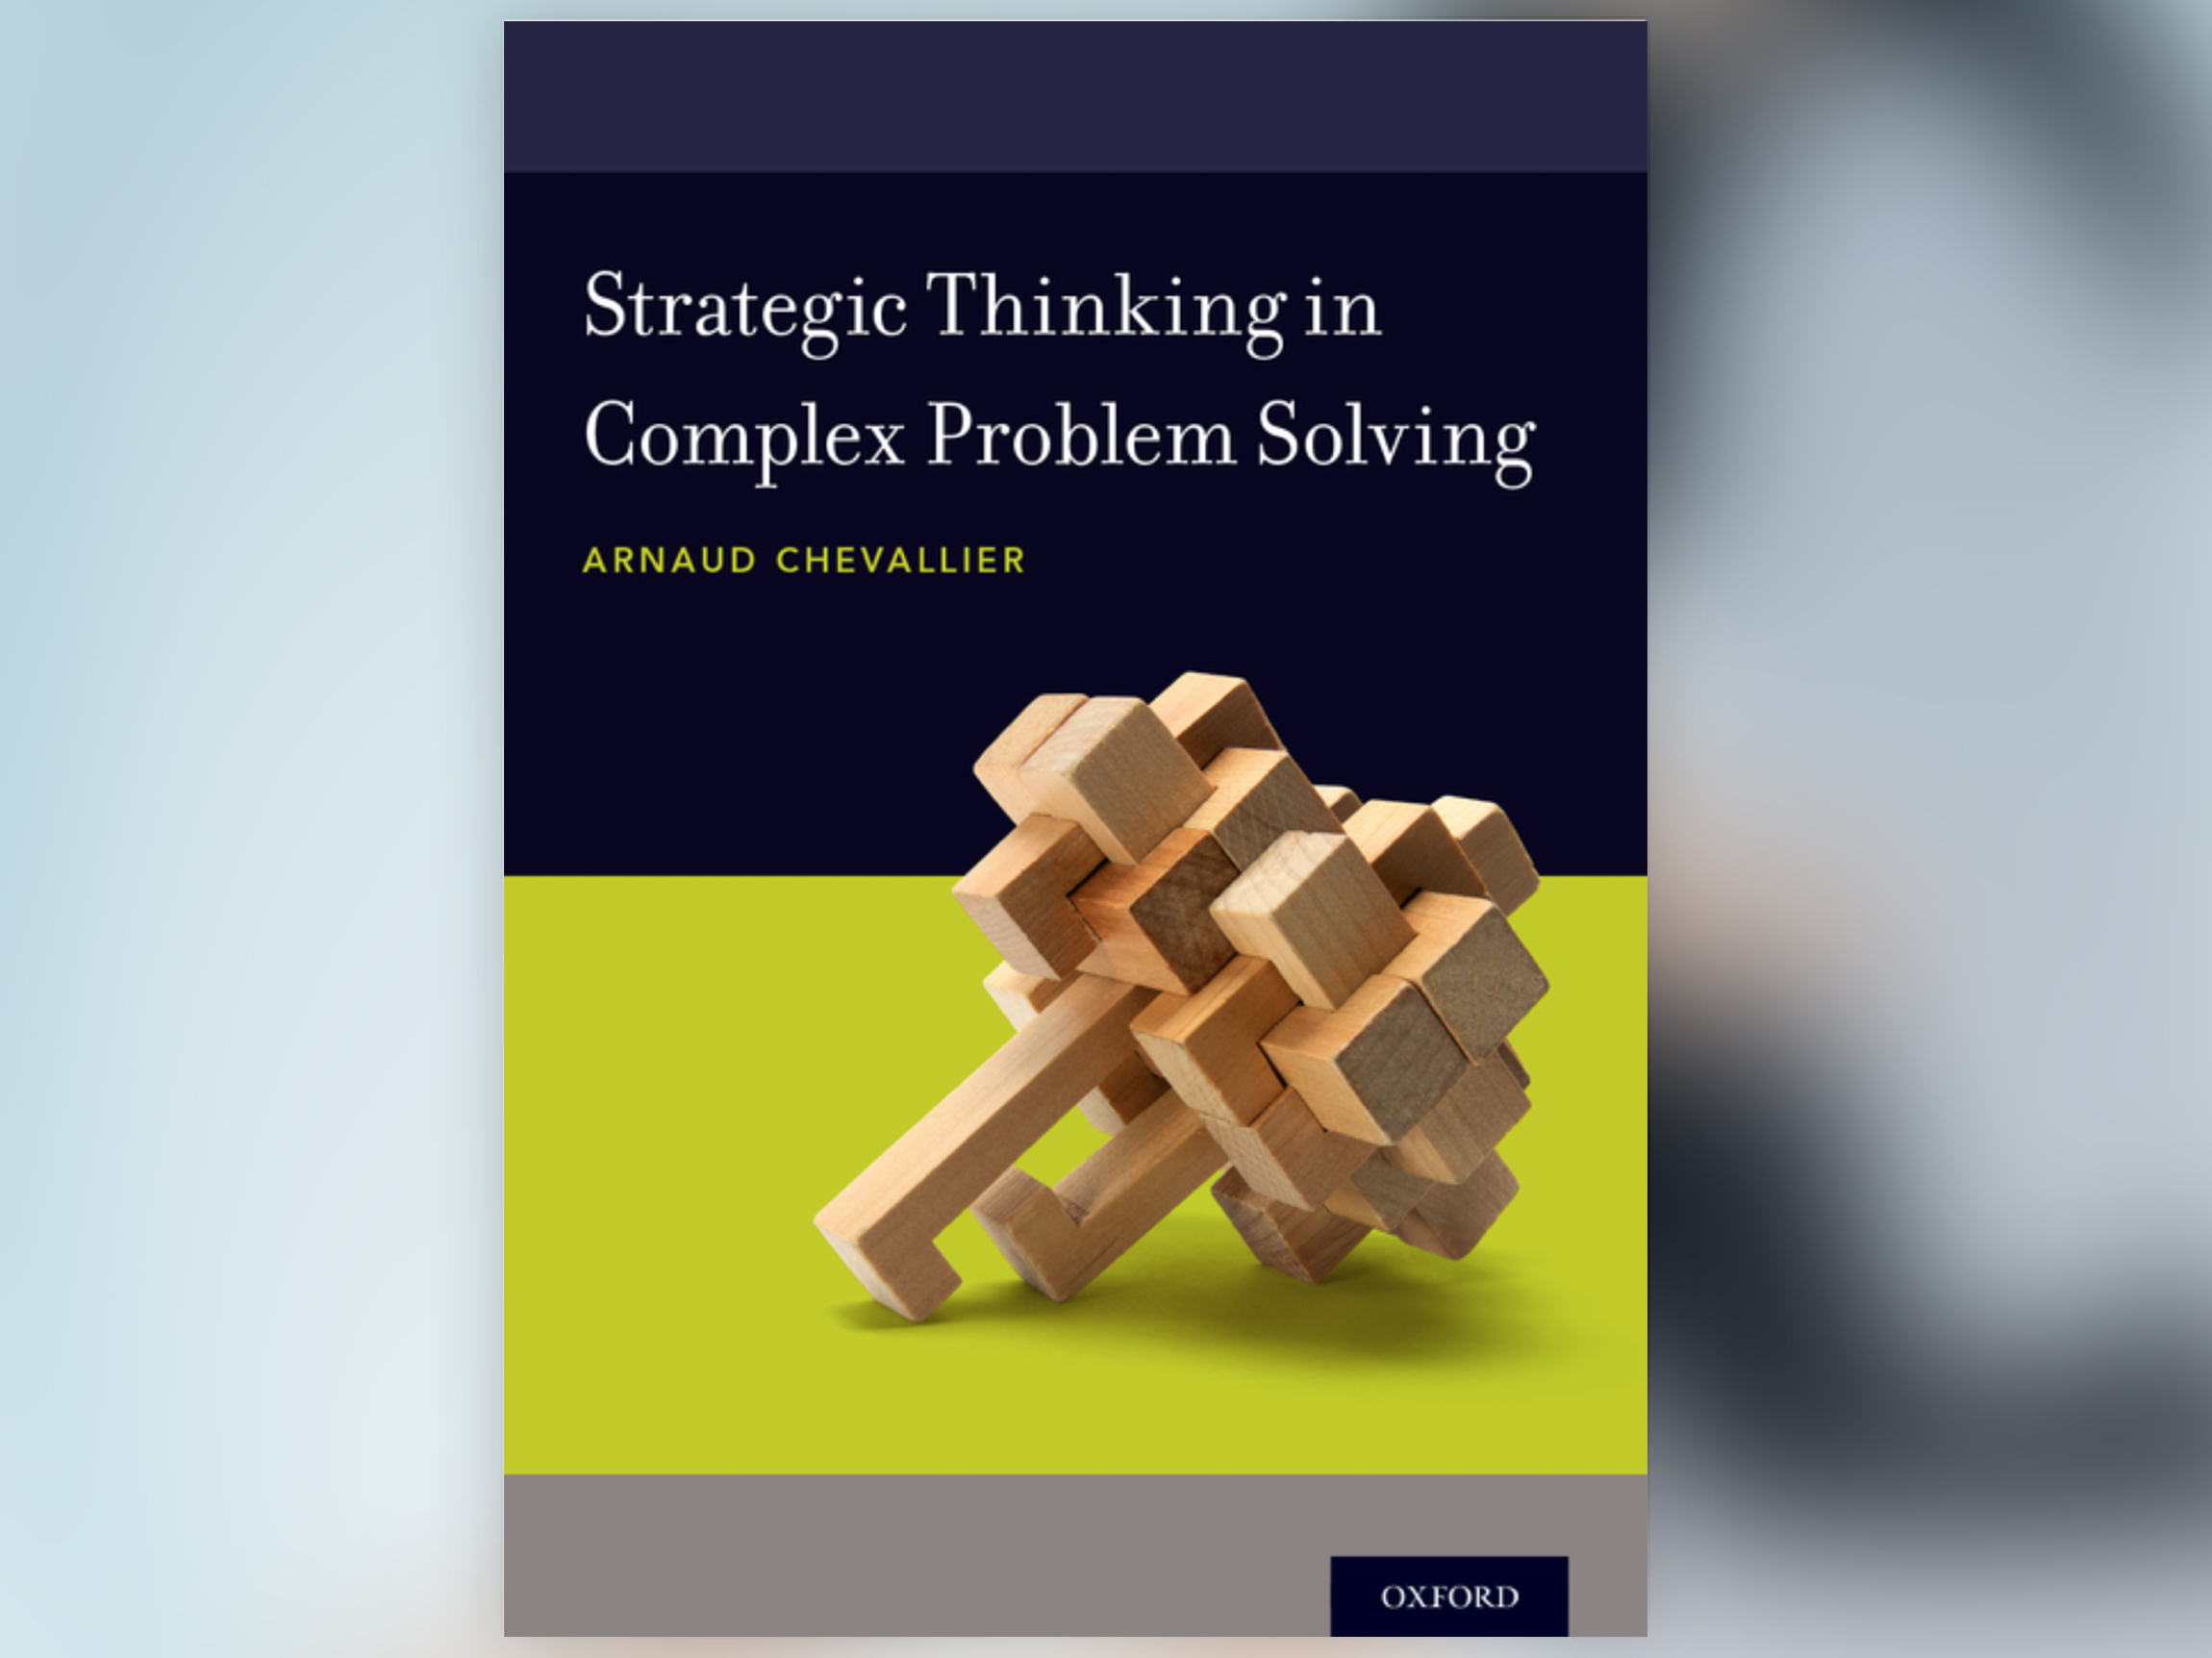 Strategic Thinking in Complex Problem Solving